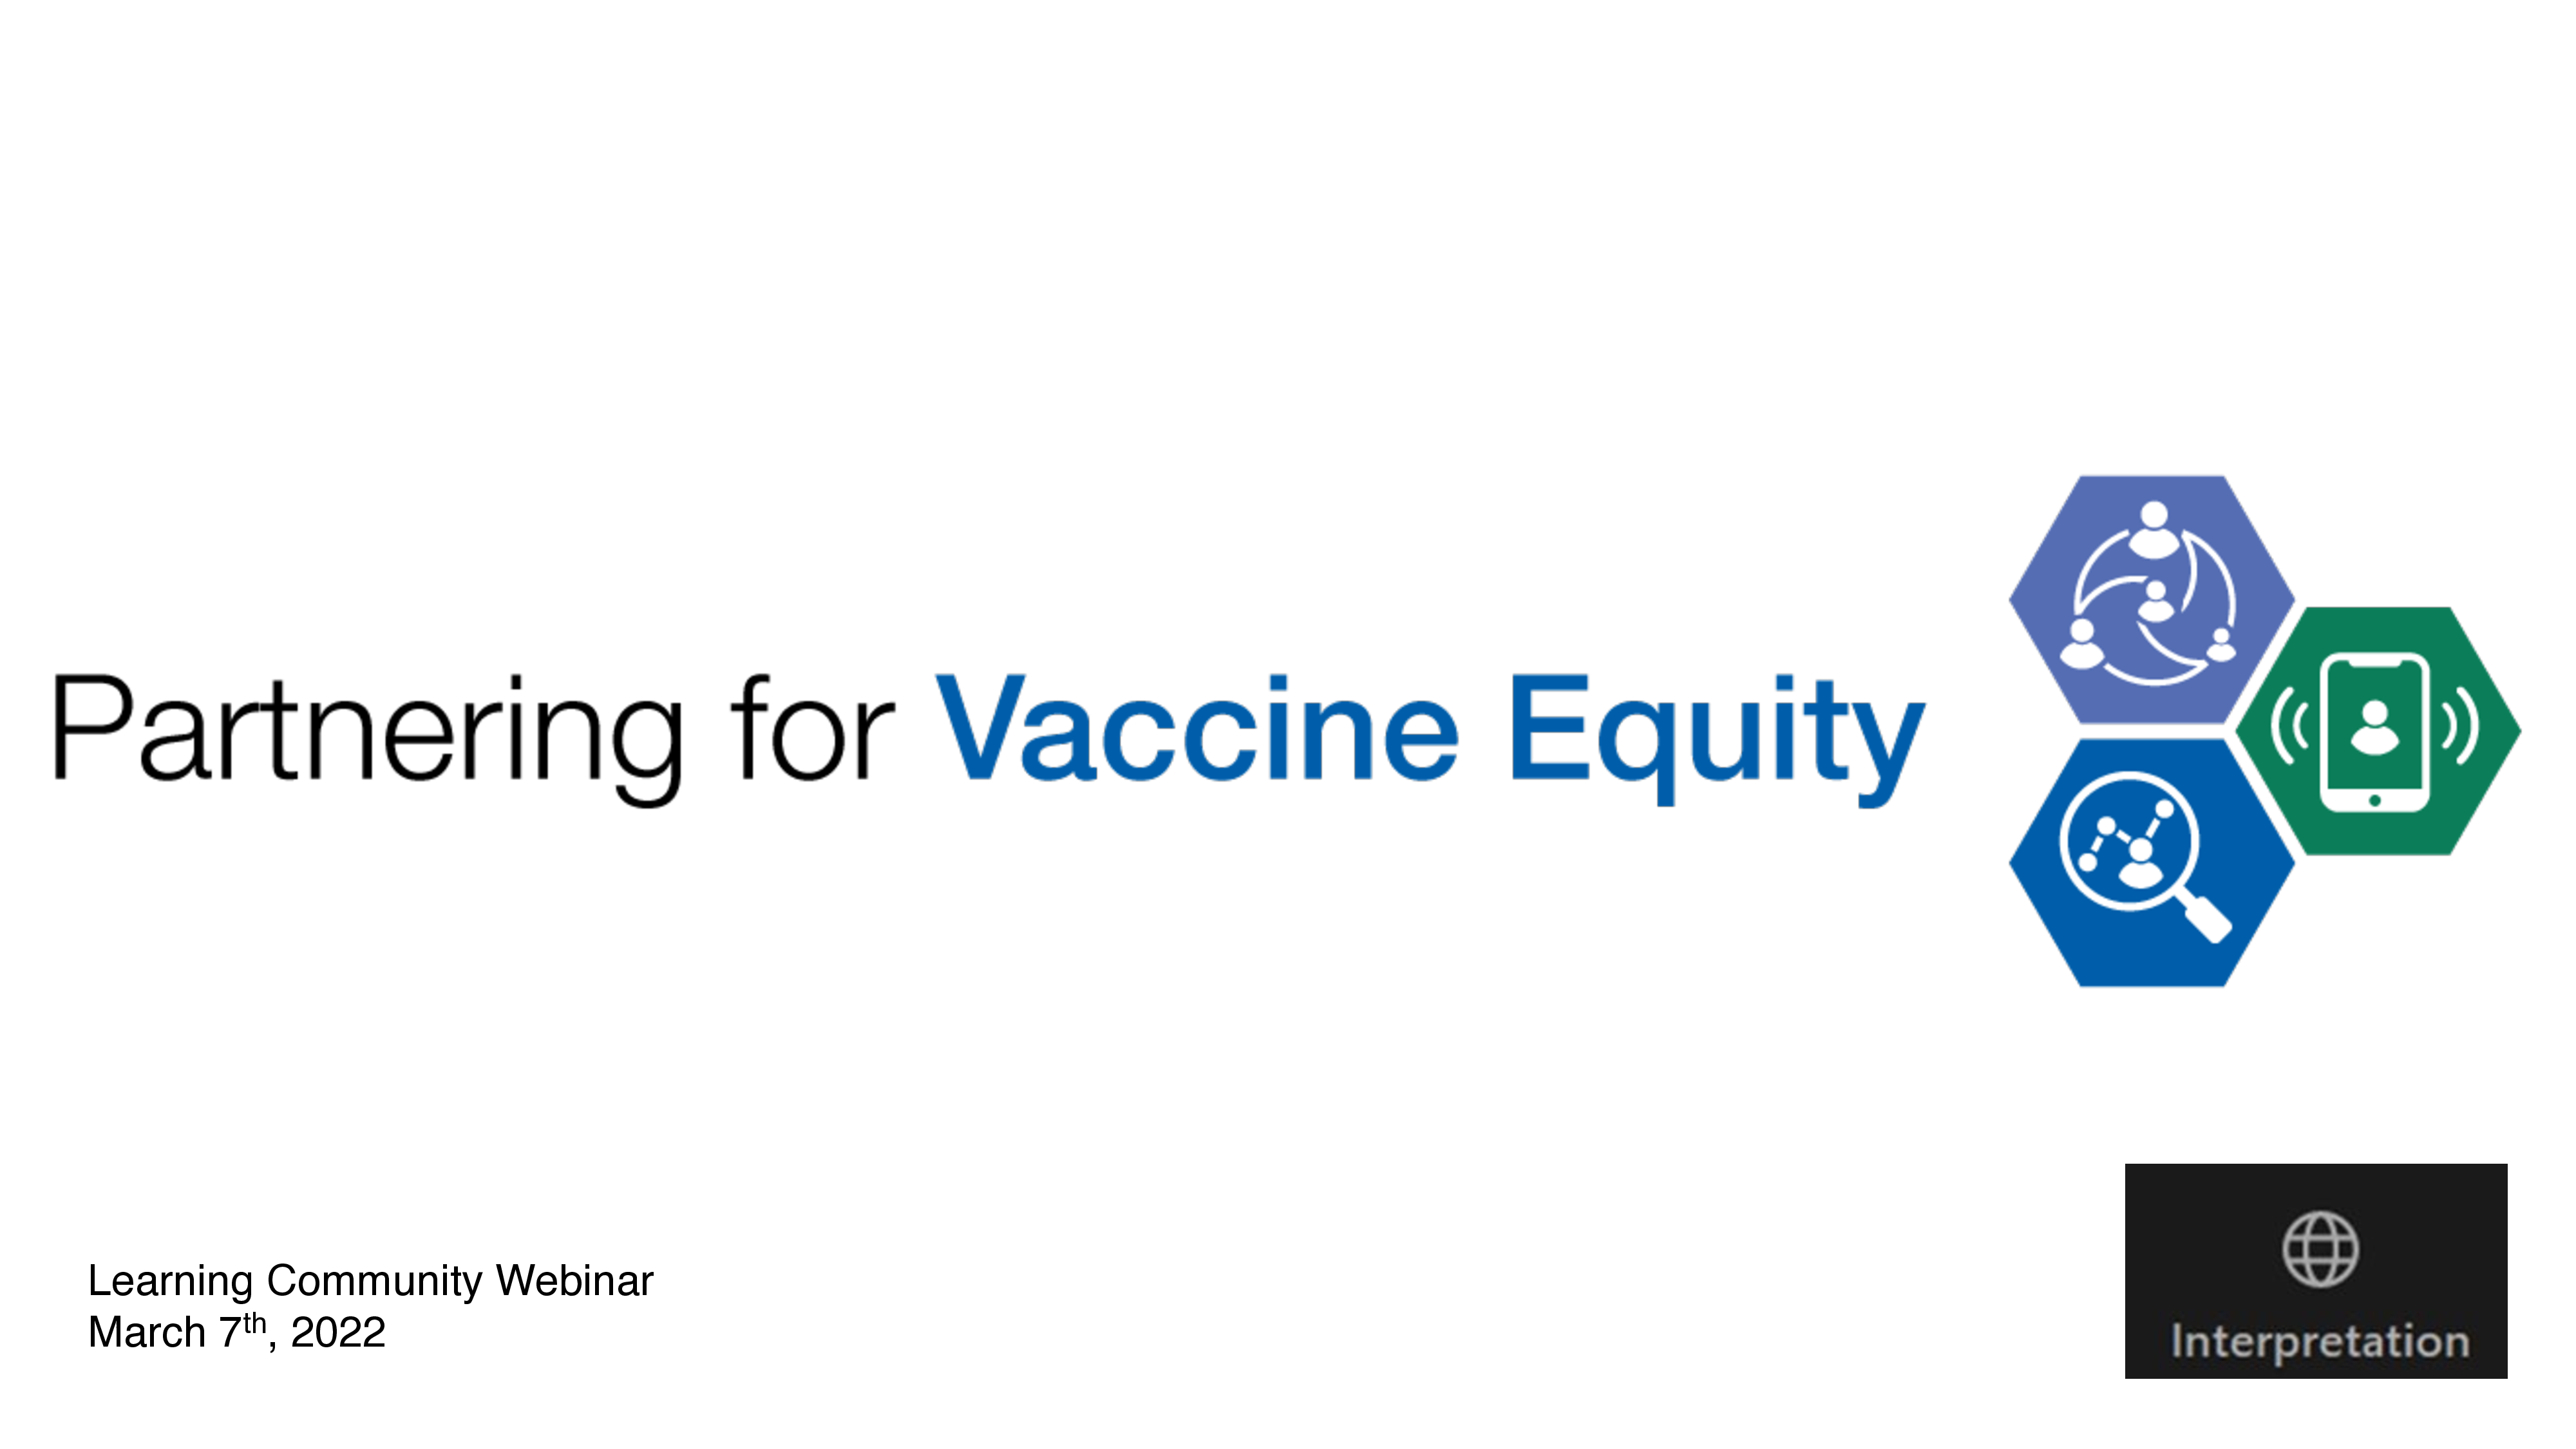 Title page of the Partnering for Vaccine Equity Learning Community Webinar held on March 7th, 2022.